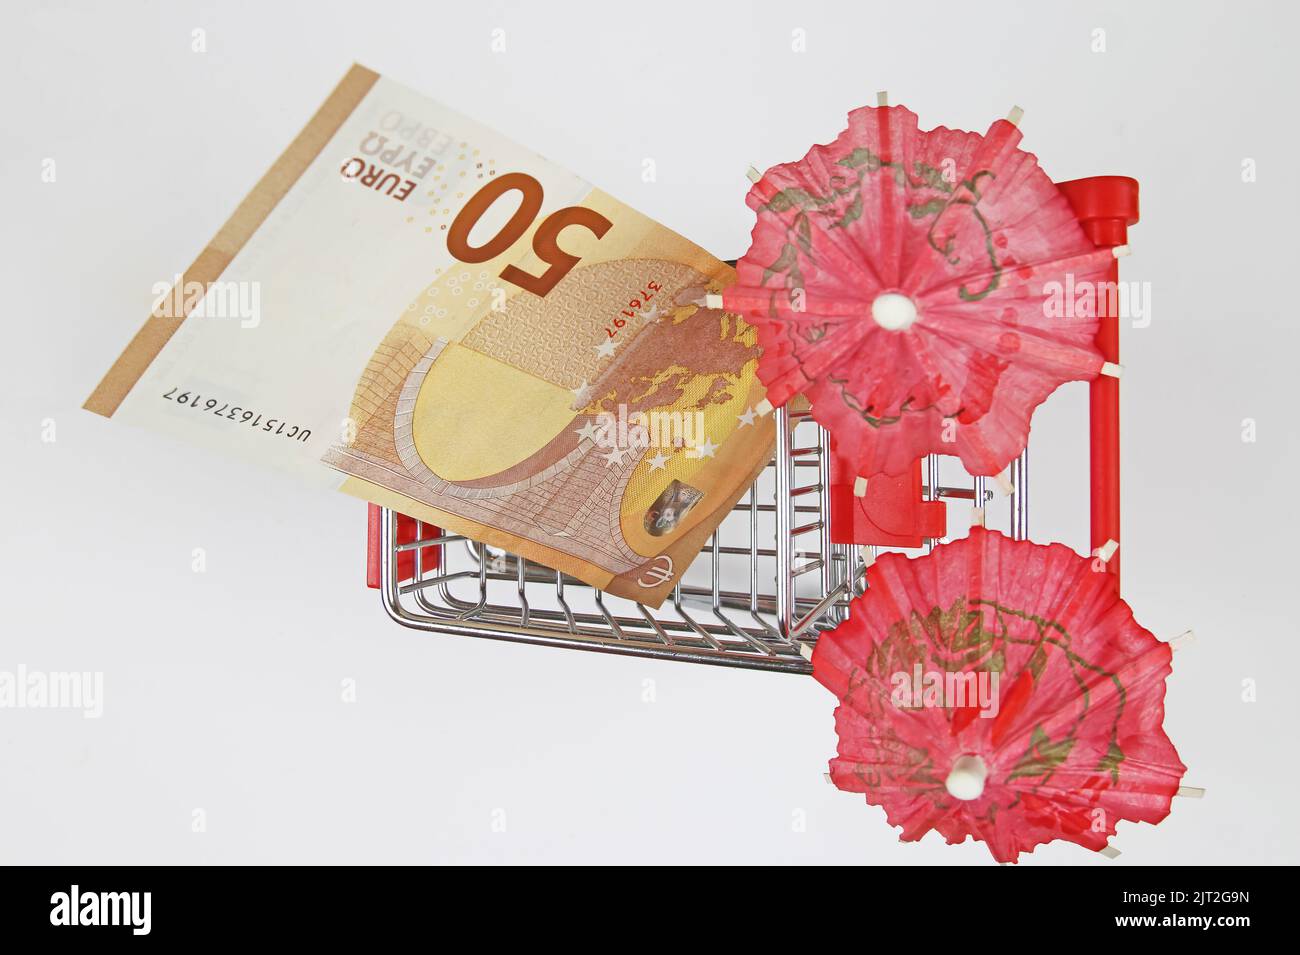 Top view on isolated shopping cart model with 50 Euro banknote, two umbrellas, white background Stock Photo